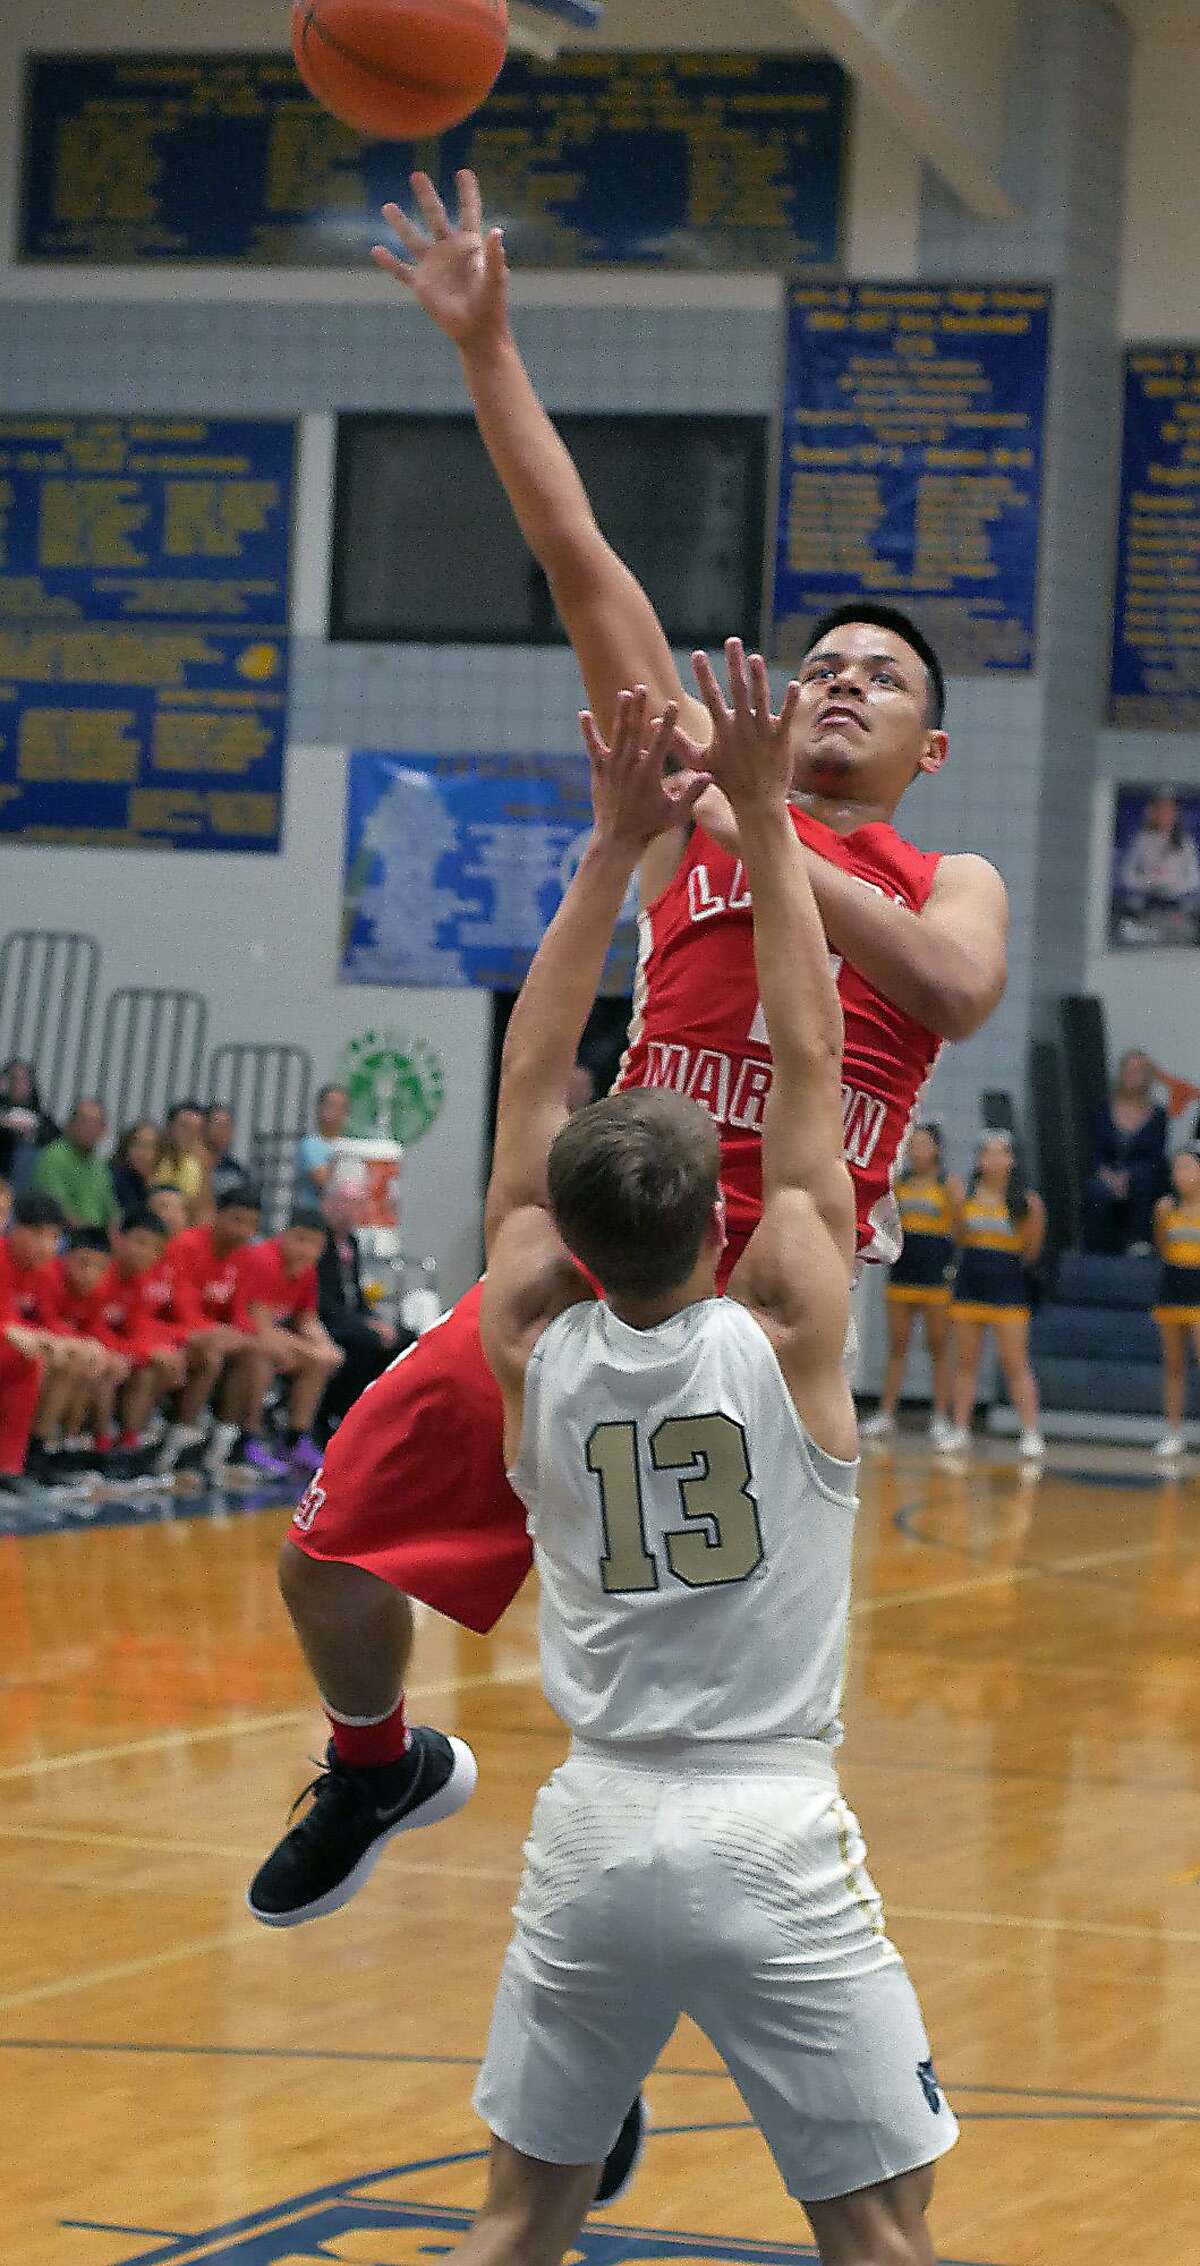 Matthew Carreon scored a game-high 22 points in a losing effort Tuesday as the Tigers fell 73-50 at Alexander.